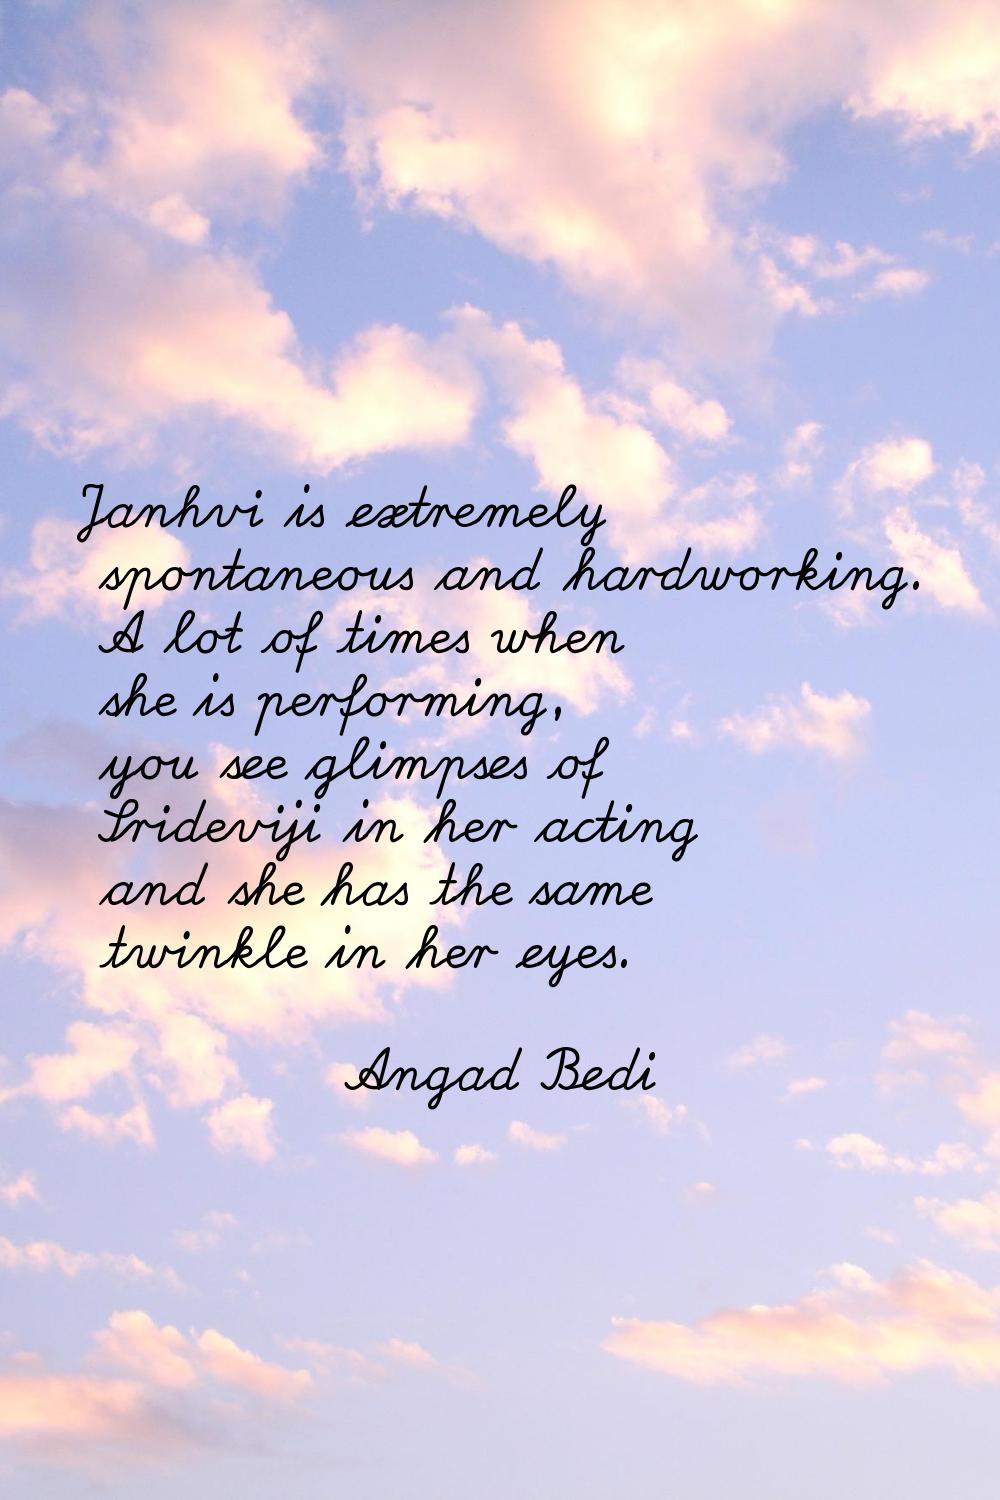 Janhvi is extremely spontaneous and hardworking. A lot of times when she is performing, you see gli